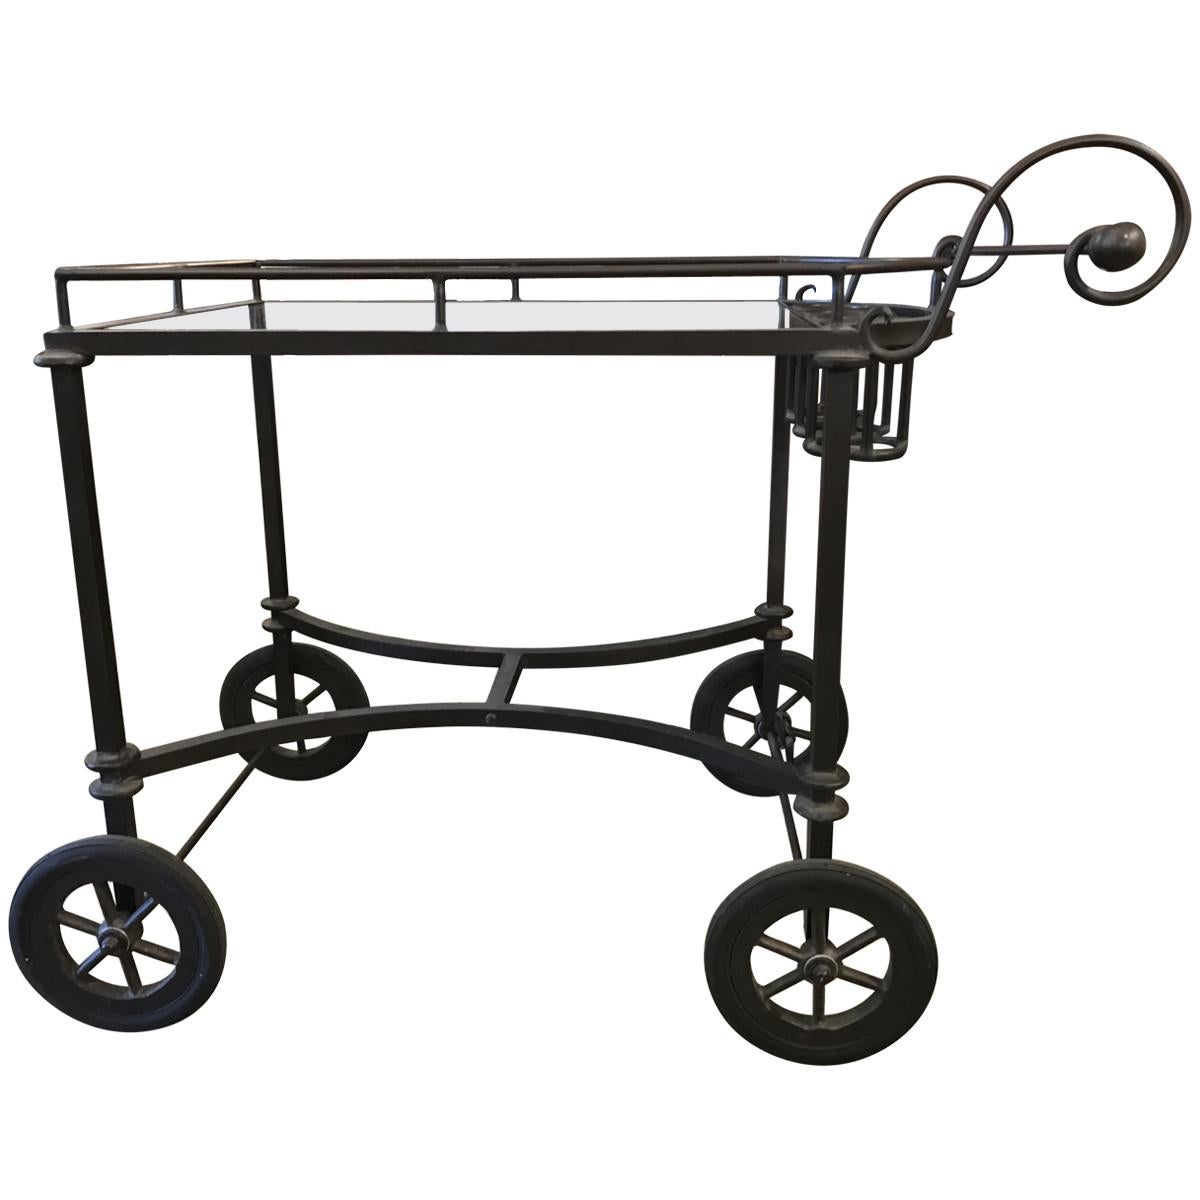 Traditional furniture is perfect for home designers looking to create a comfortable and timeless sophistication in their households. This rustic outdoor bar cart is made from a wrought iron frame in a dark brown finish, which nicely complements its